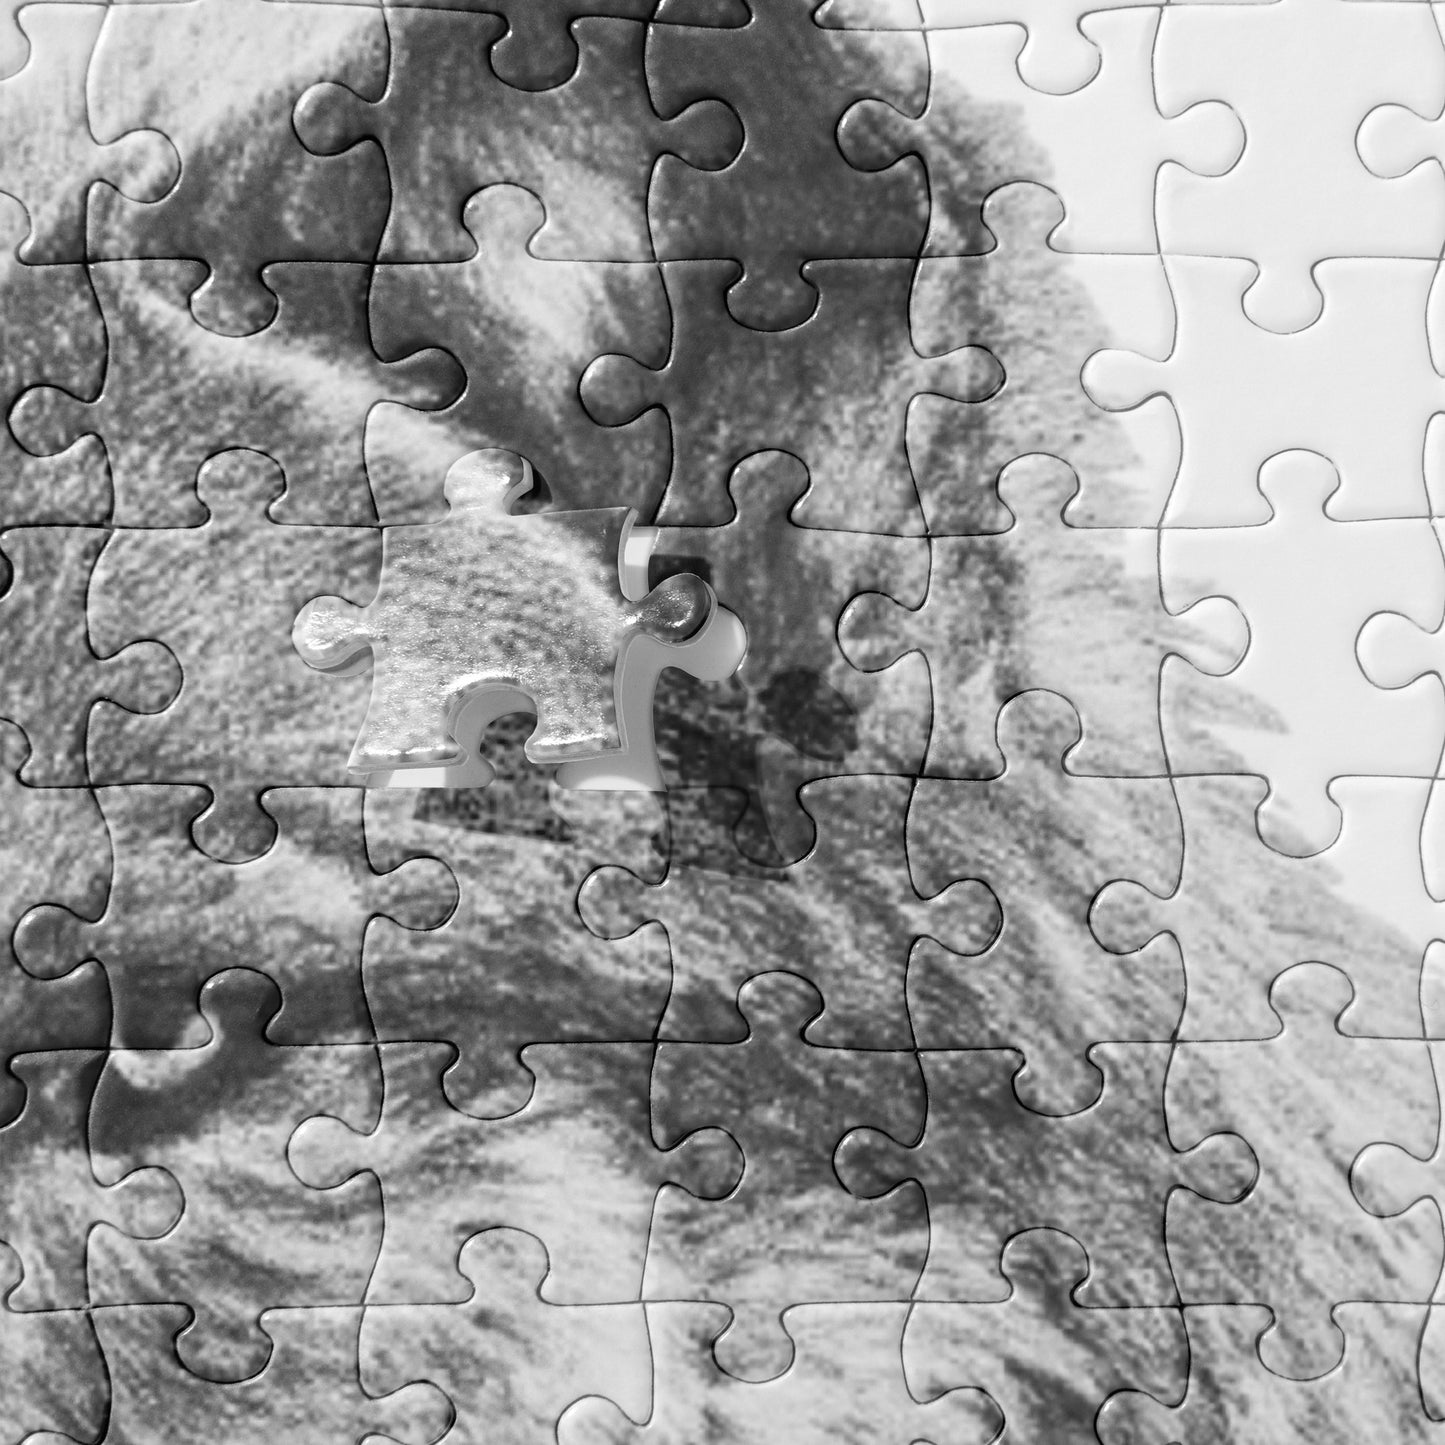 The "Wolf Jigsaw Puzzle" is from a drawing of mine created with a graphite pencil. It has been digitally optimized and transferred to a pressed paper chipboard which makes it suitable for framing.